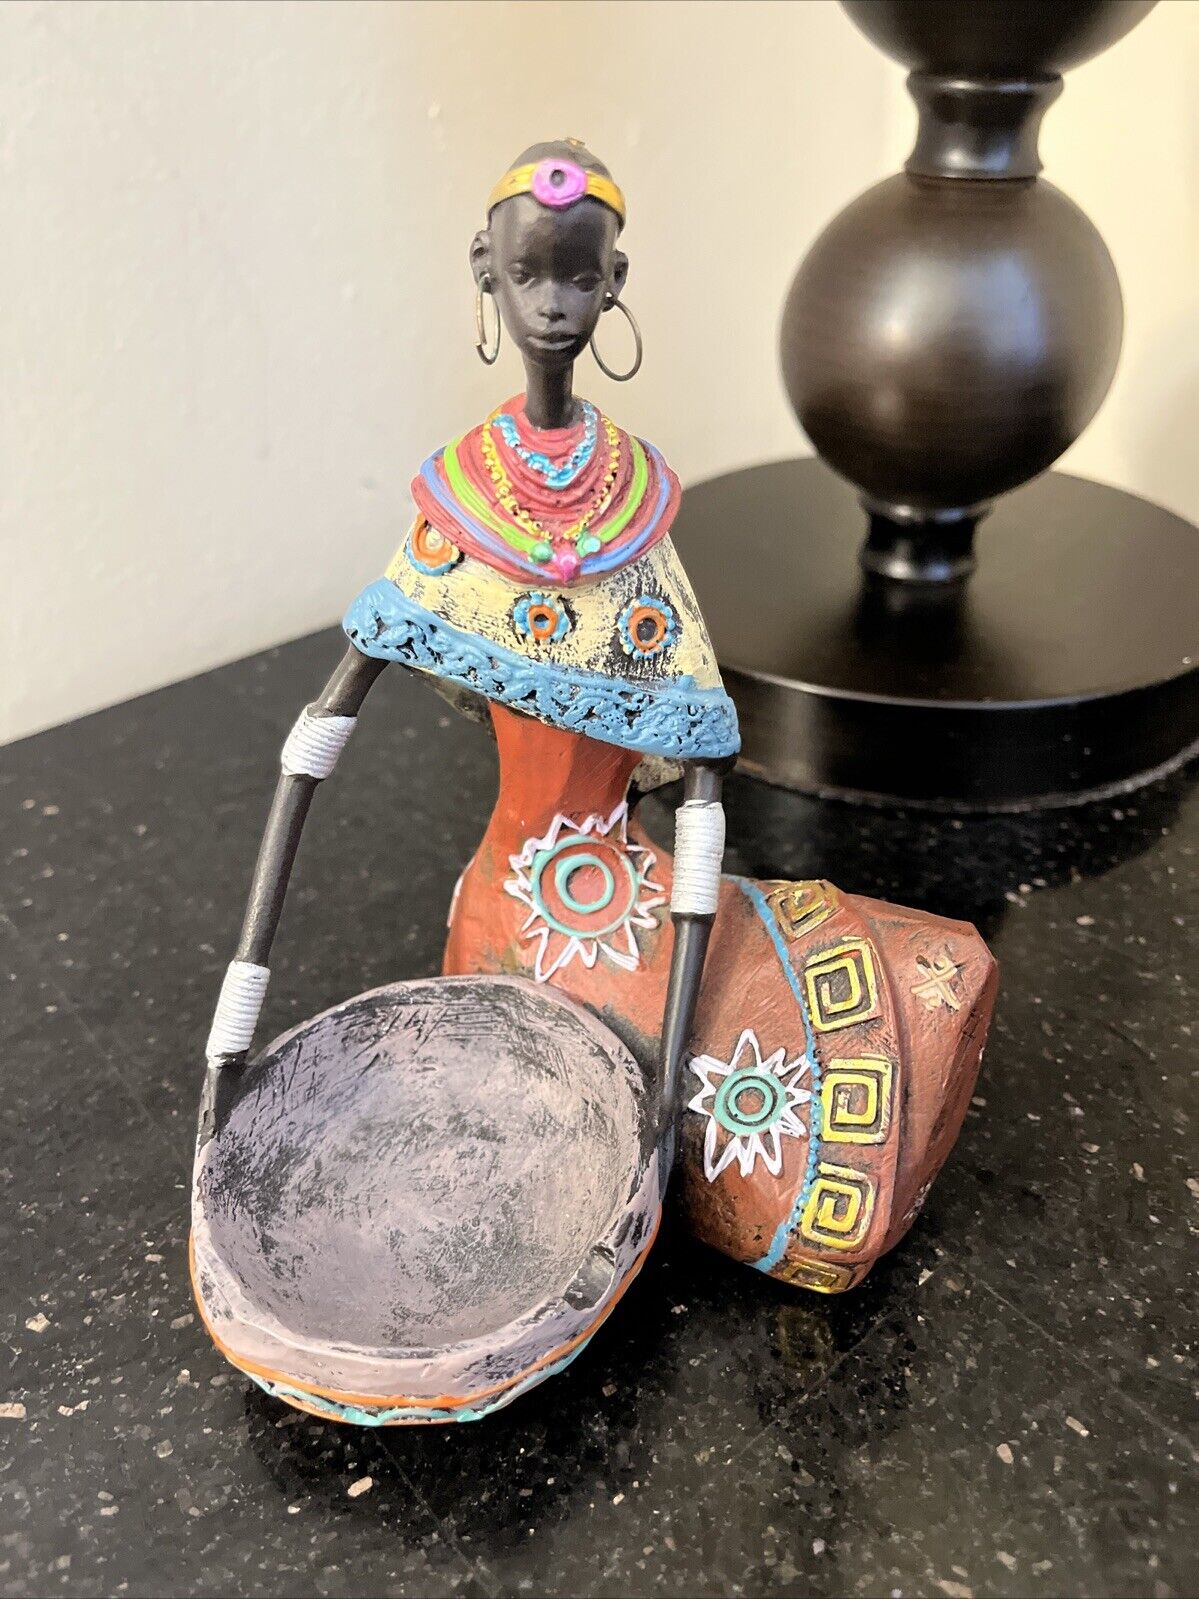 Vintage African Woman Holding Large Bowl Figurine Great Tool History Teacher